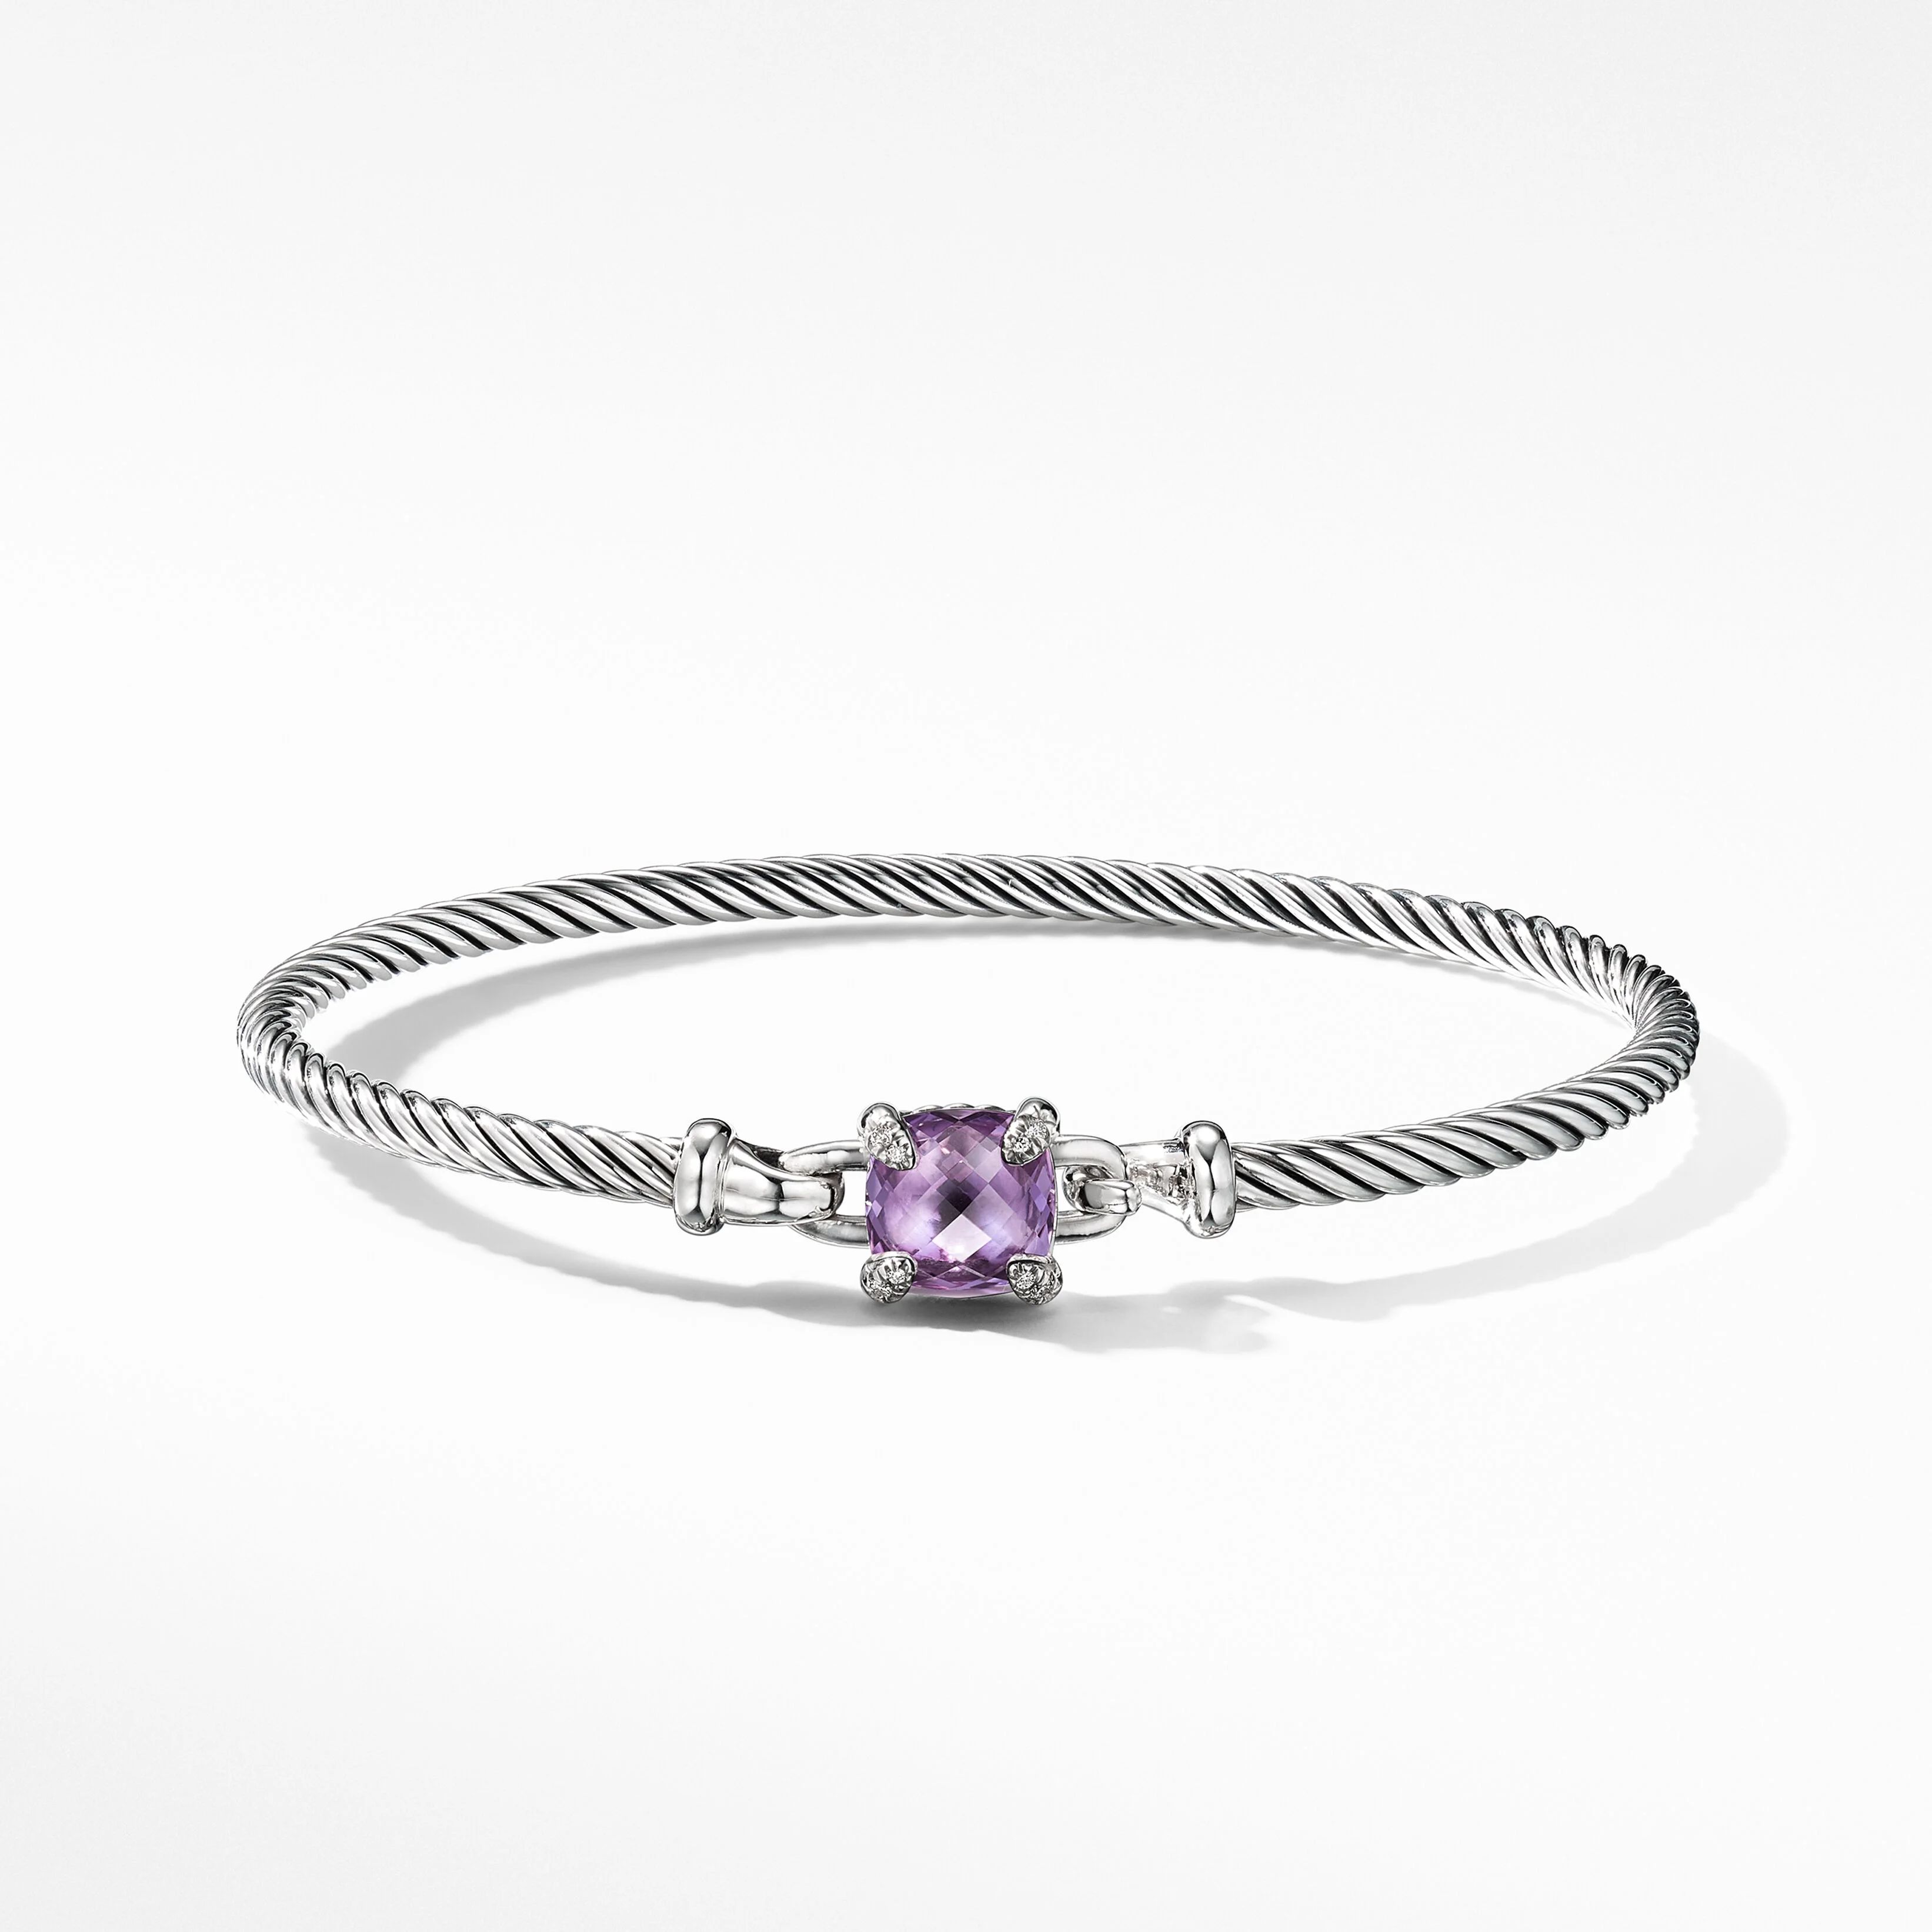 Chatelaine® Bracelet in Sterling Silver with Amethyst and Pavé Diamonds | David Yurman